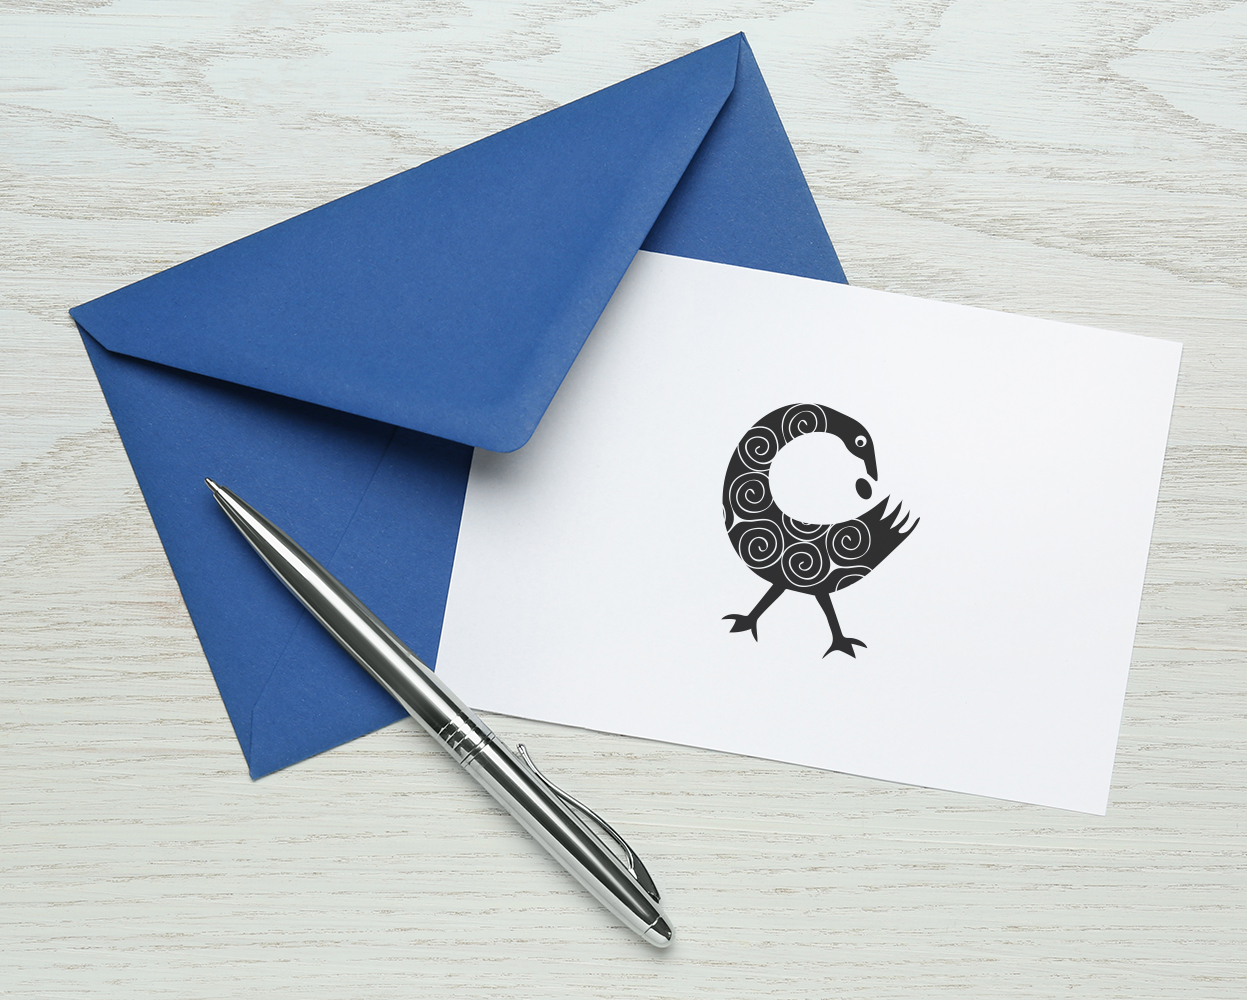 Are Our Priorities Out of Whack? What the Sankofa Bird Can Teach Us by @CPierceWriter #priorities #communication #handwrittennotes